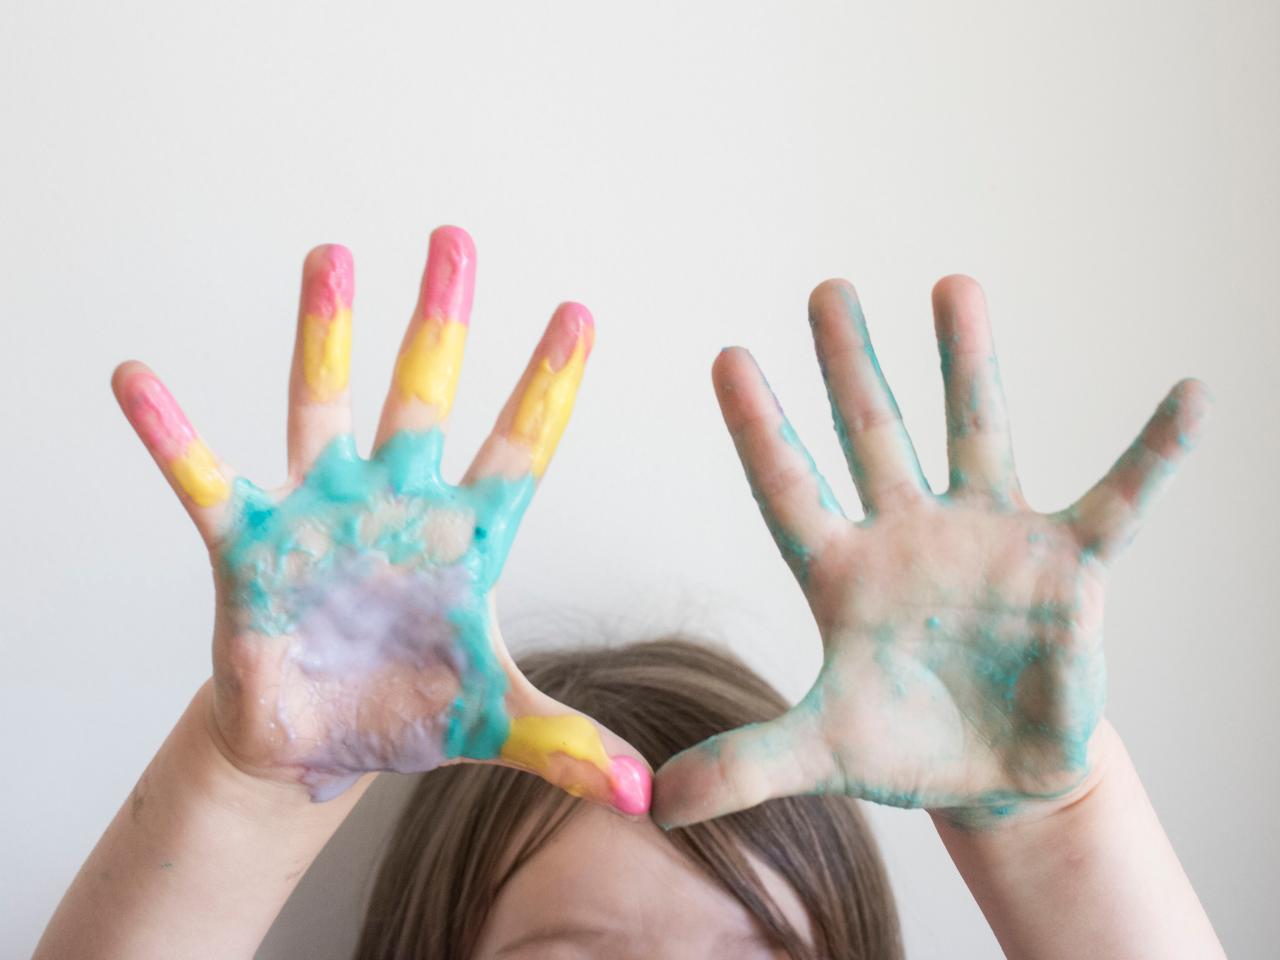 Crafts for Kids: Homemade Paint with Food Coloring {Non Toxic}